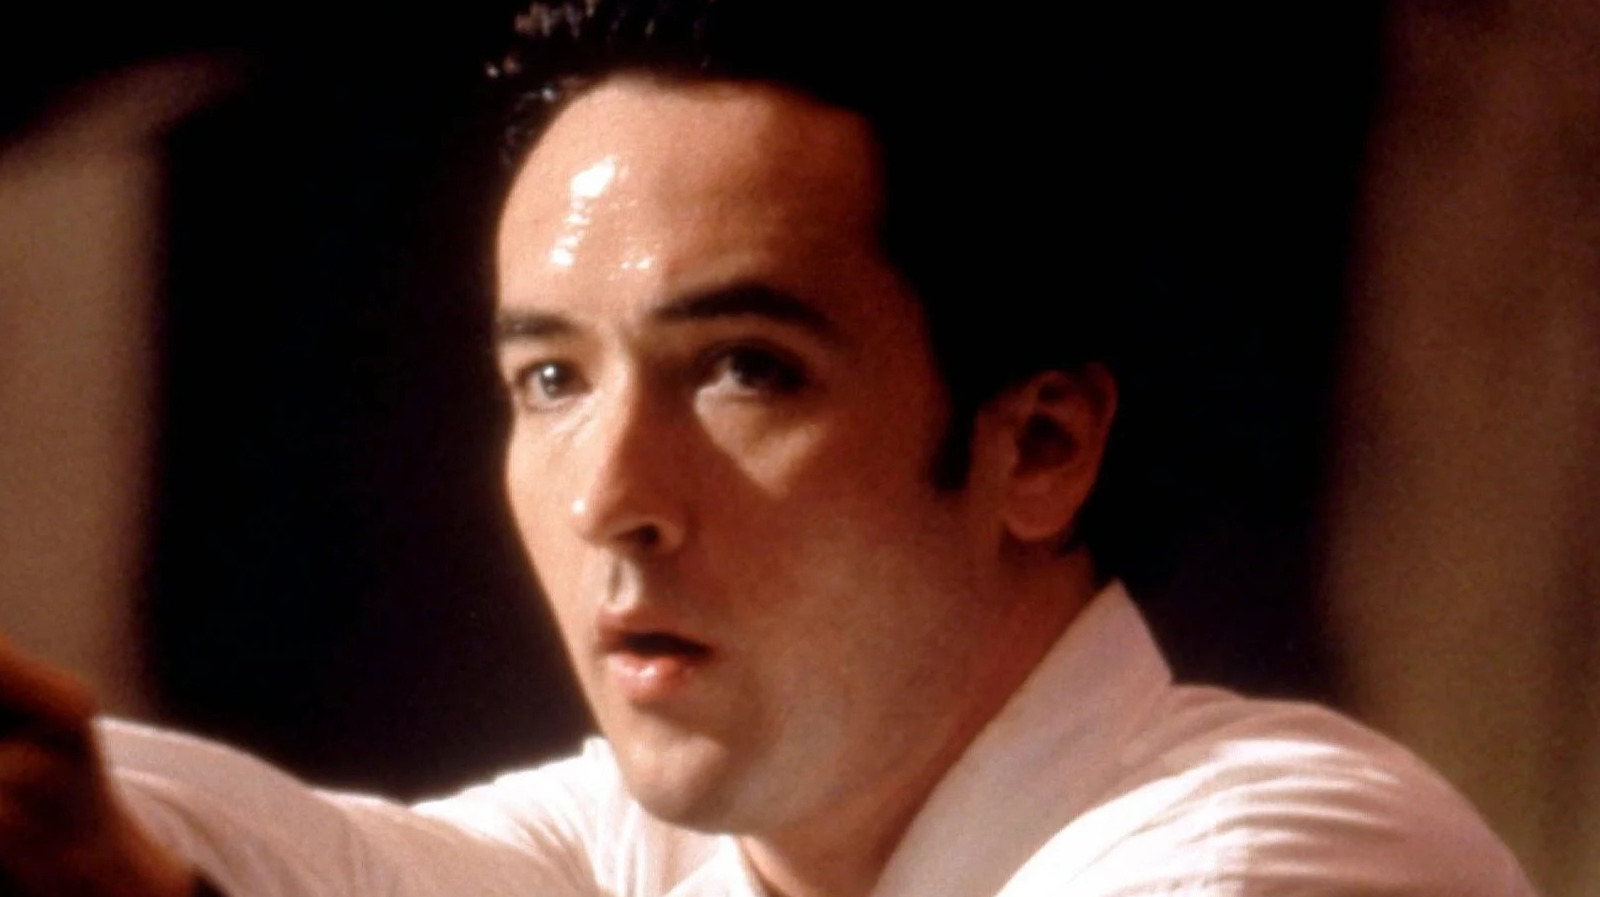 https://www.slashfilm.com/img/gallery/john-cusack-wanted-his-con-air-character-to-stand-out-from-other-action-heroes-in-one-key-way/l-intro-1660835736.jpg